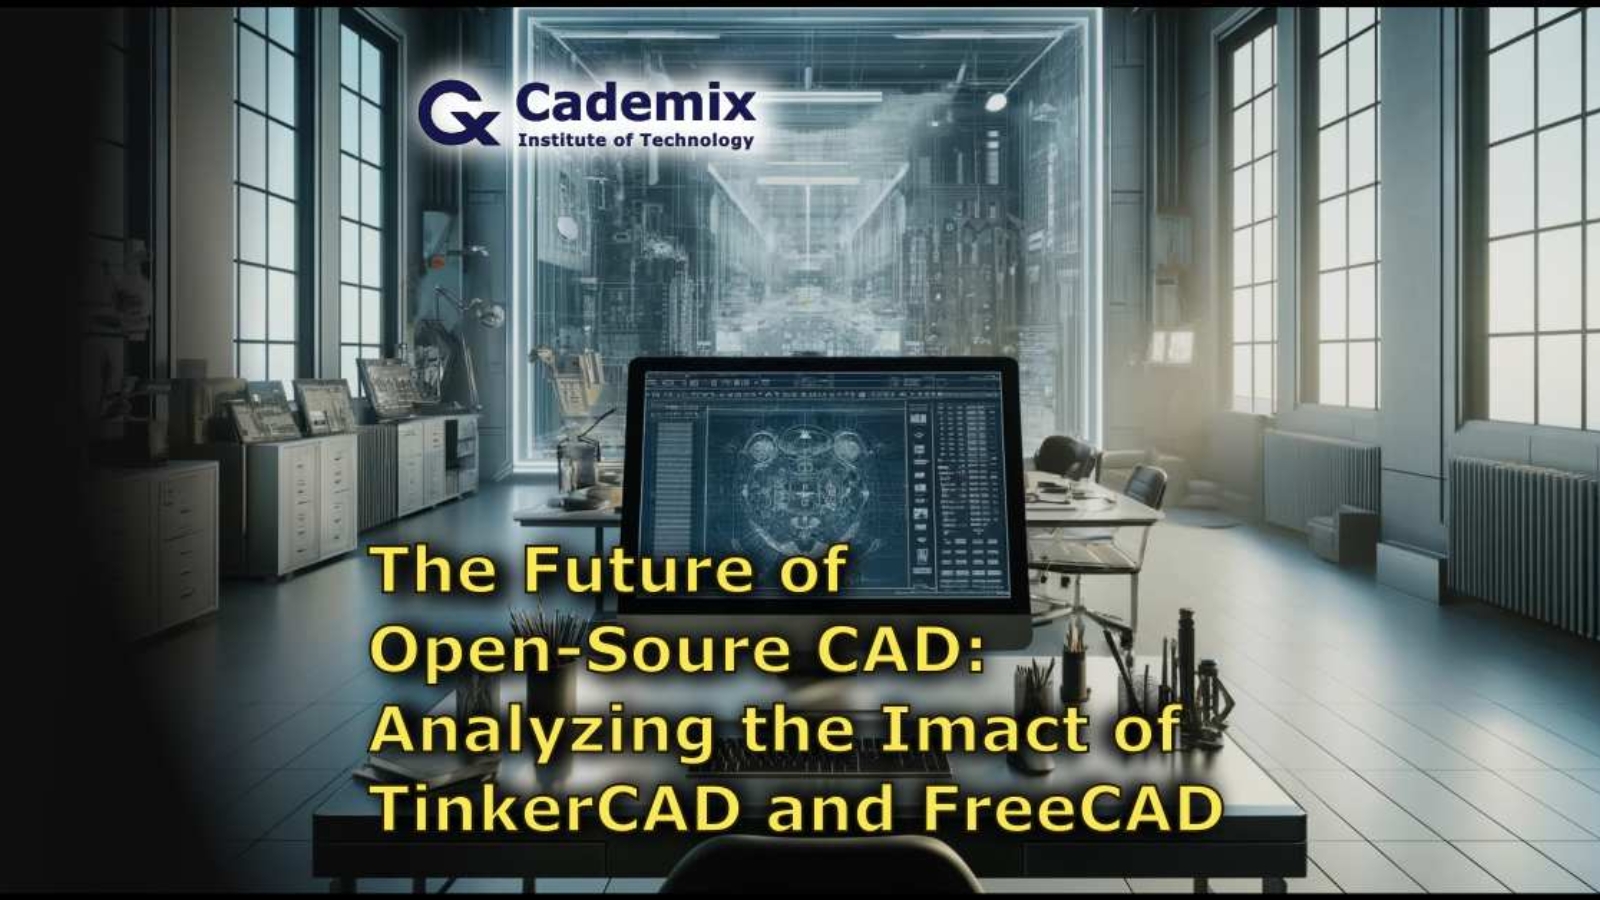 A horizontal full HD image of a futuristic CAD design studio, featuring a large monitor with complex CAD software interface, high-tech gadgets and tools